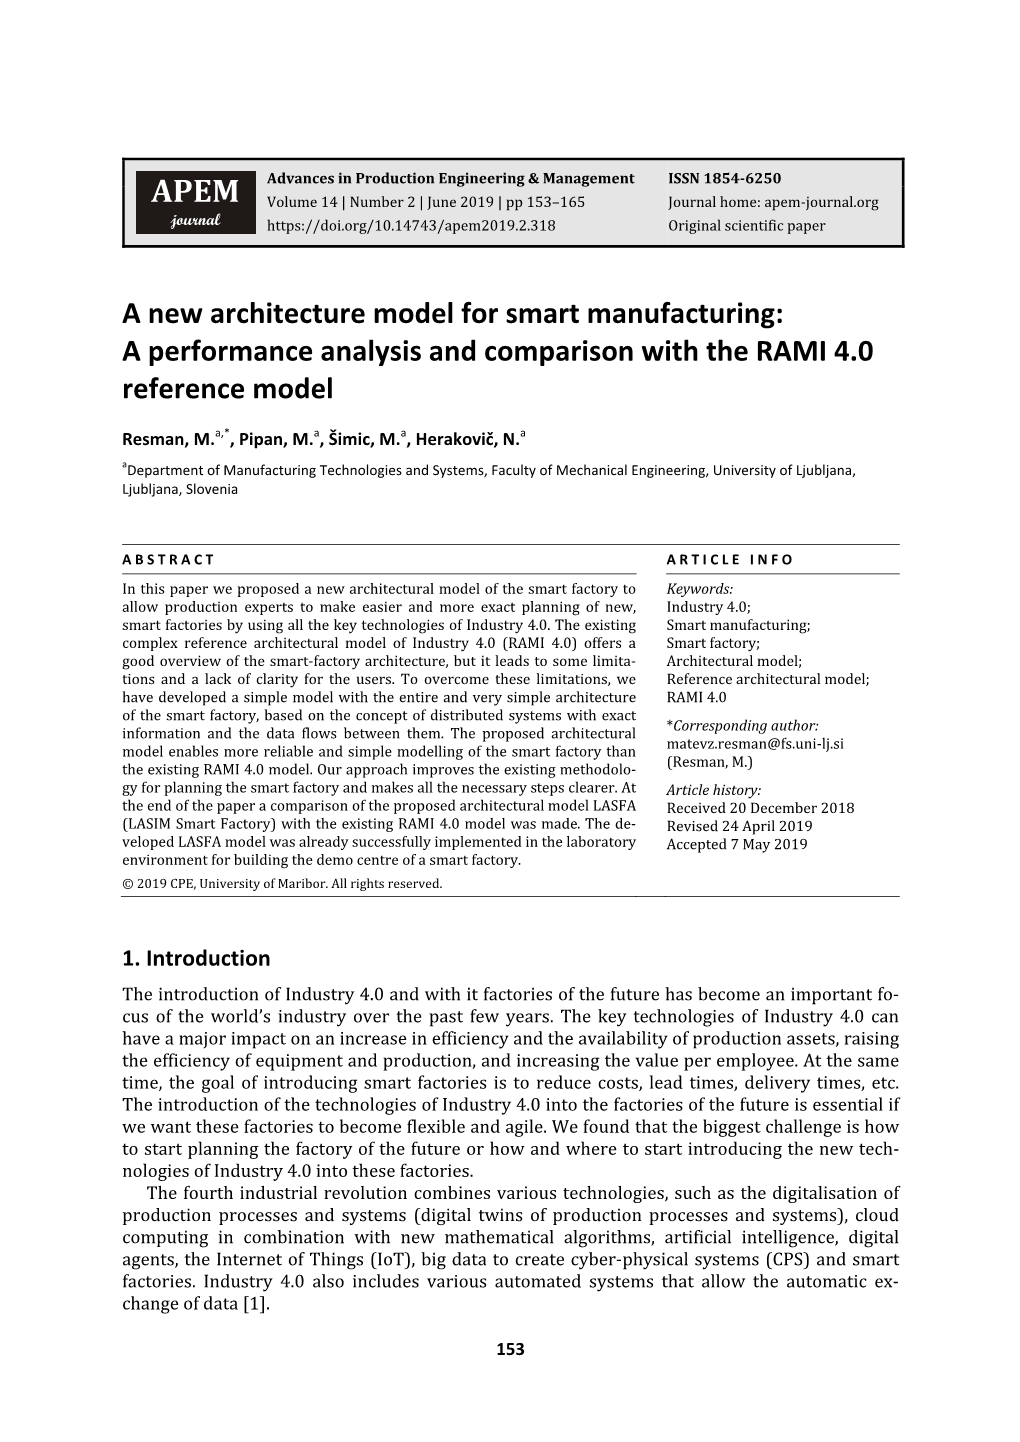 A New Architecture Model for Smart Manufacturing: a Performance Analysis and Comparison with the RAMI 4.0 Reference Model